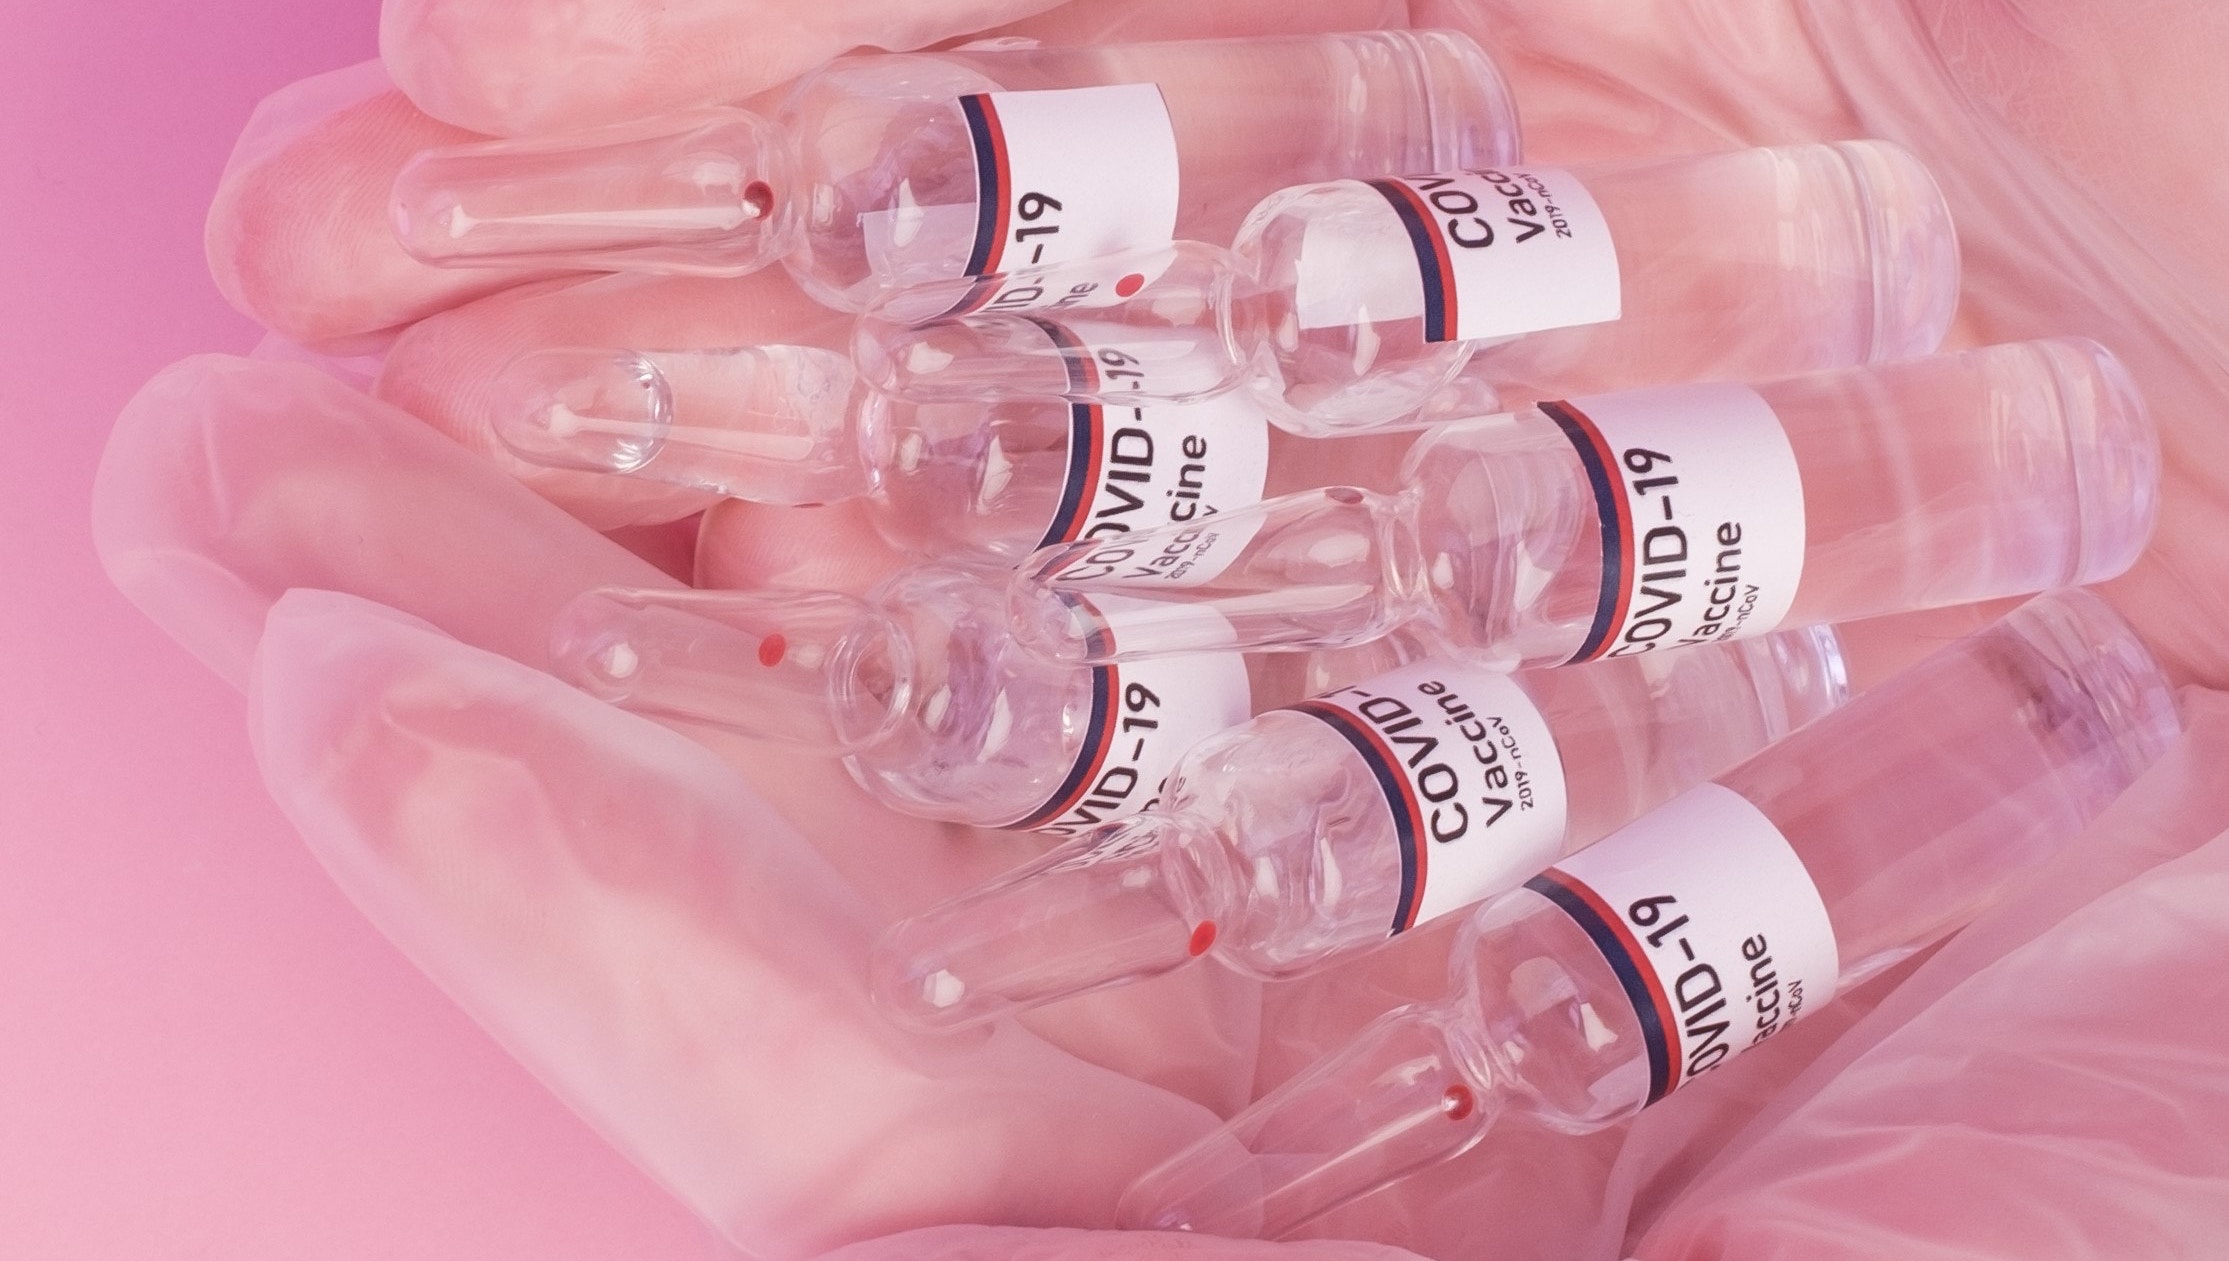 Vials of COVID-19 vaccine in a hand